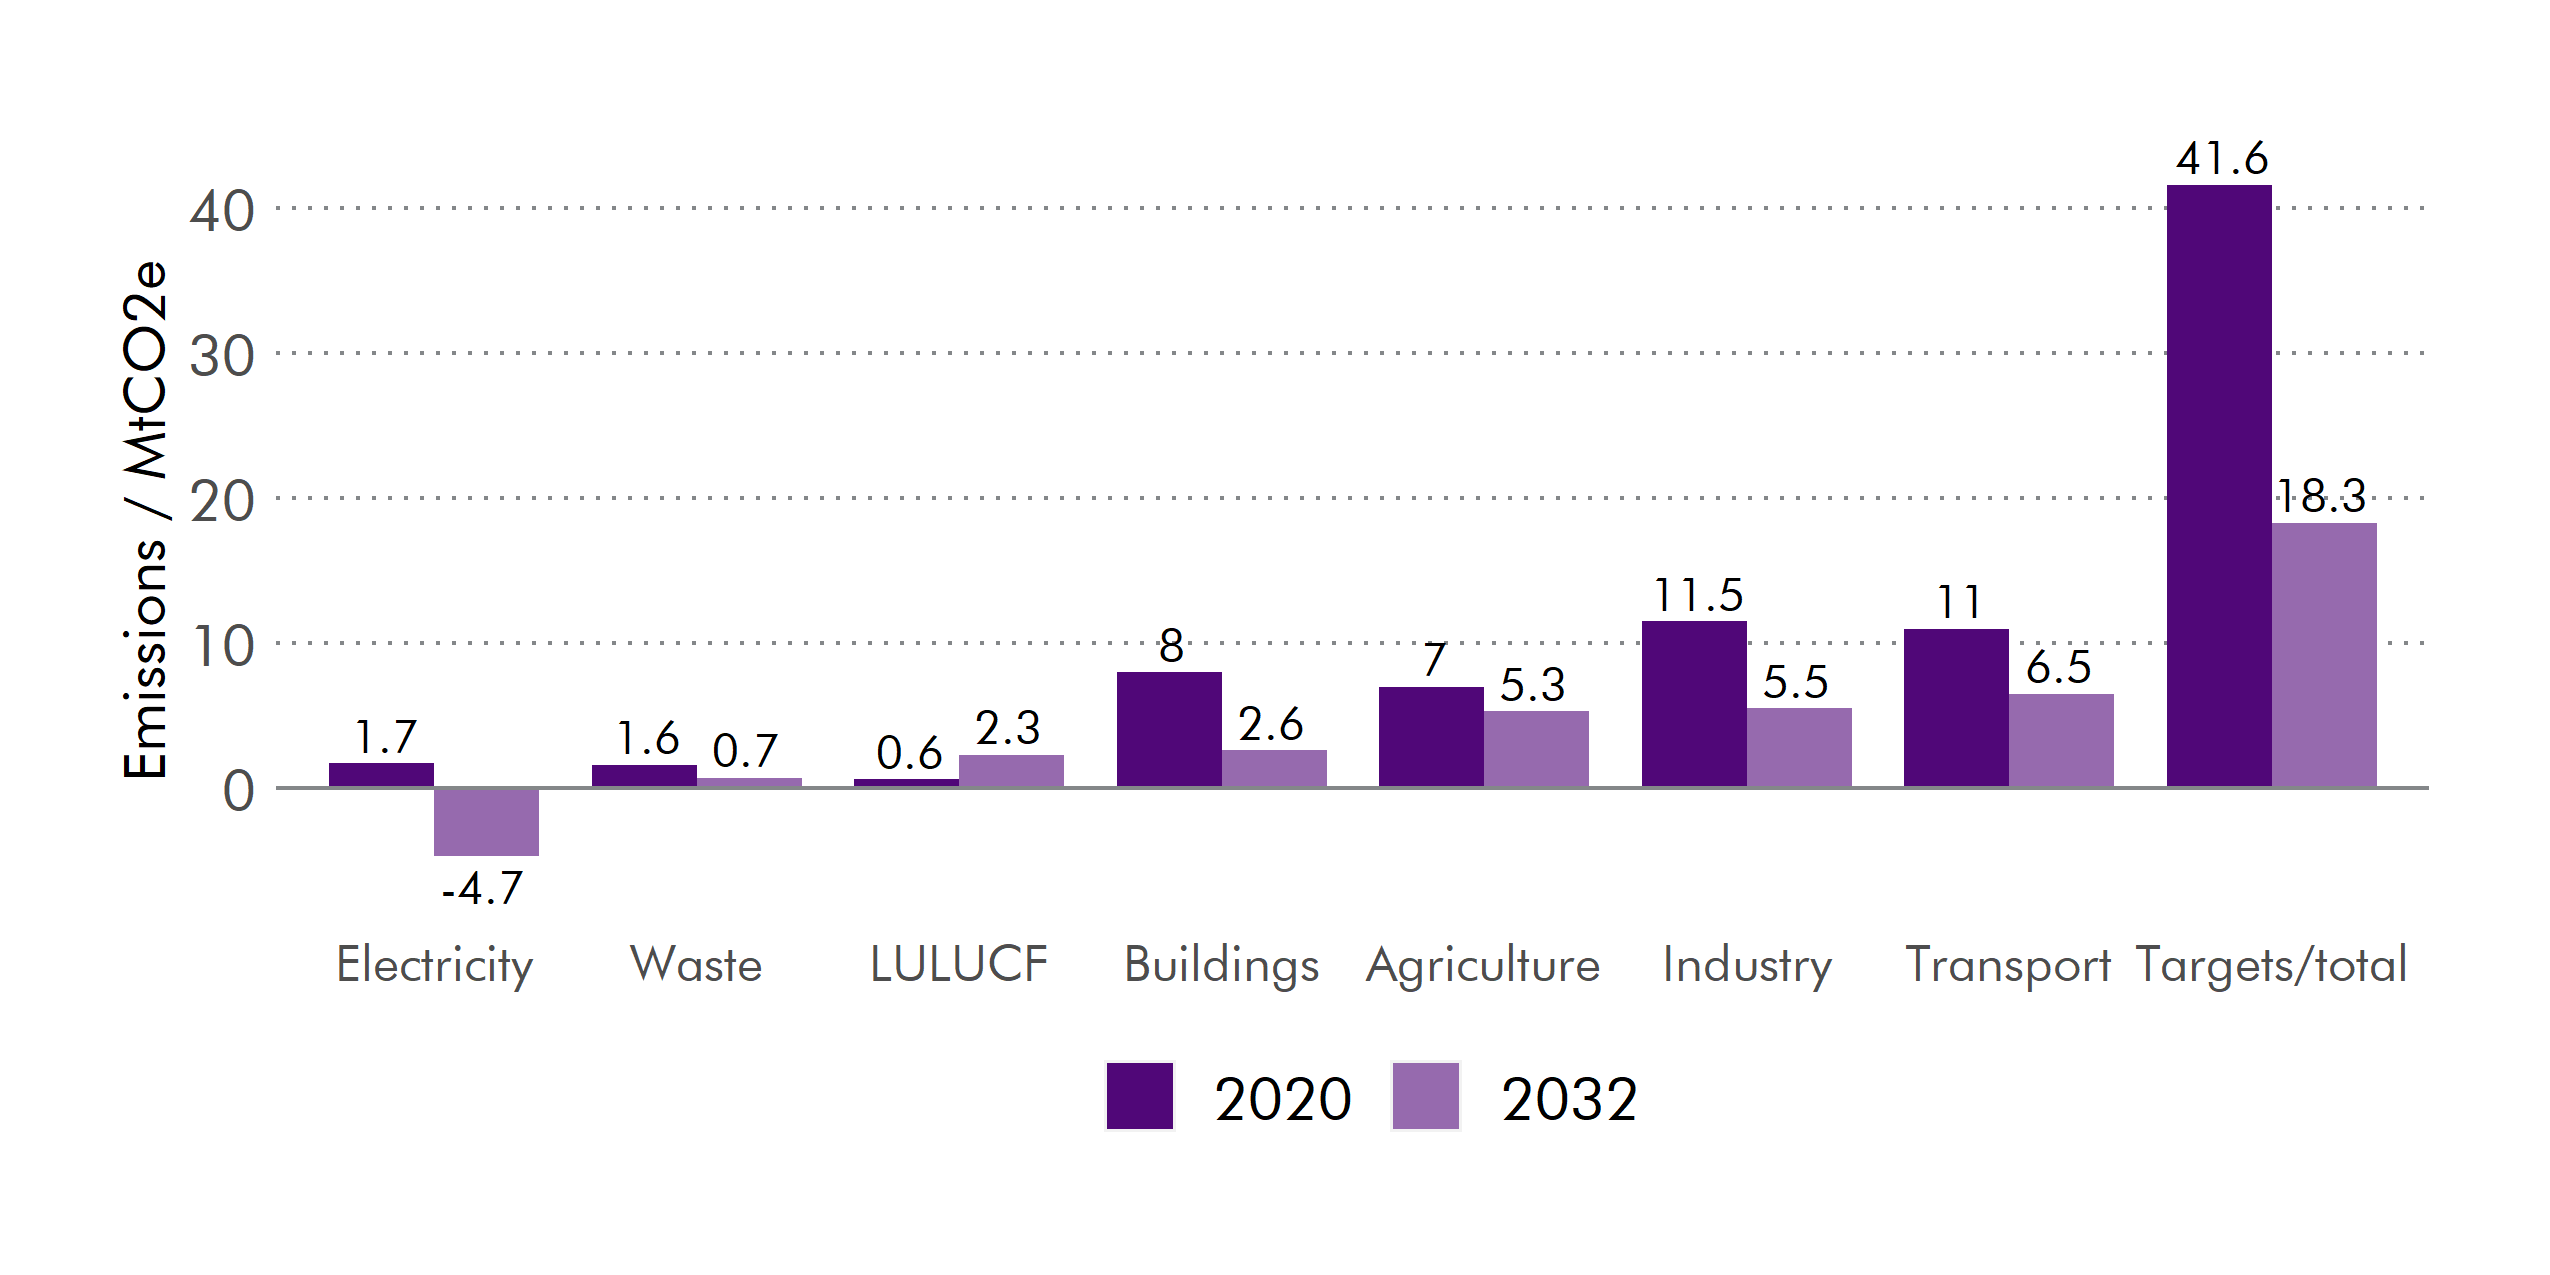 Emissions reductions are expected in all sectors, apart from LULUCF.